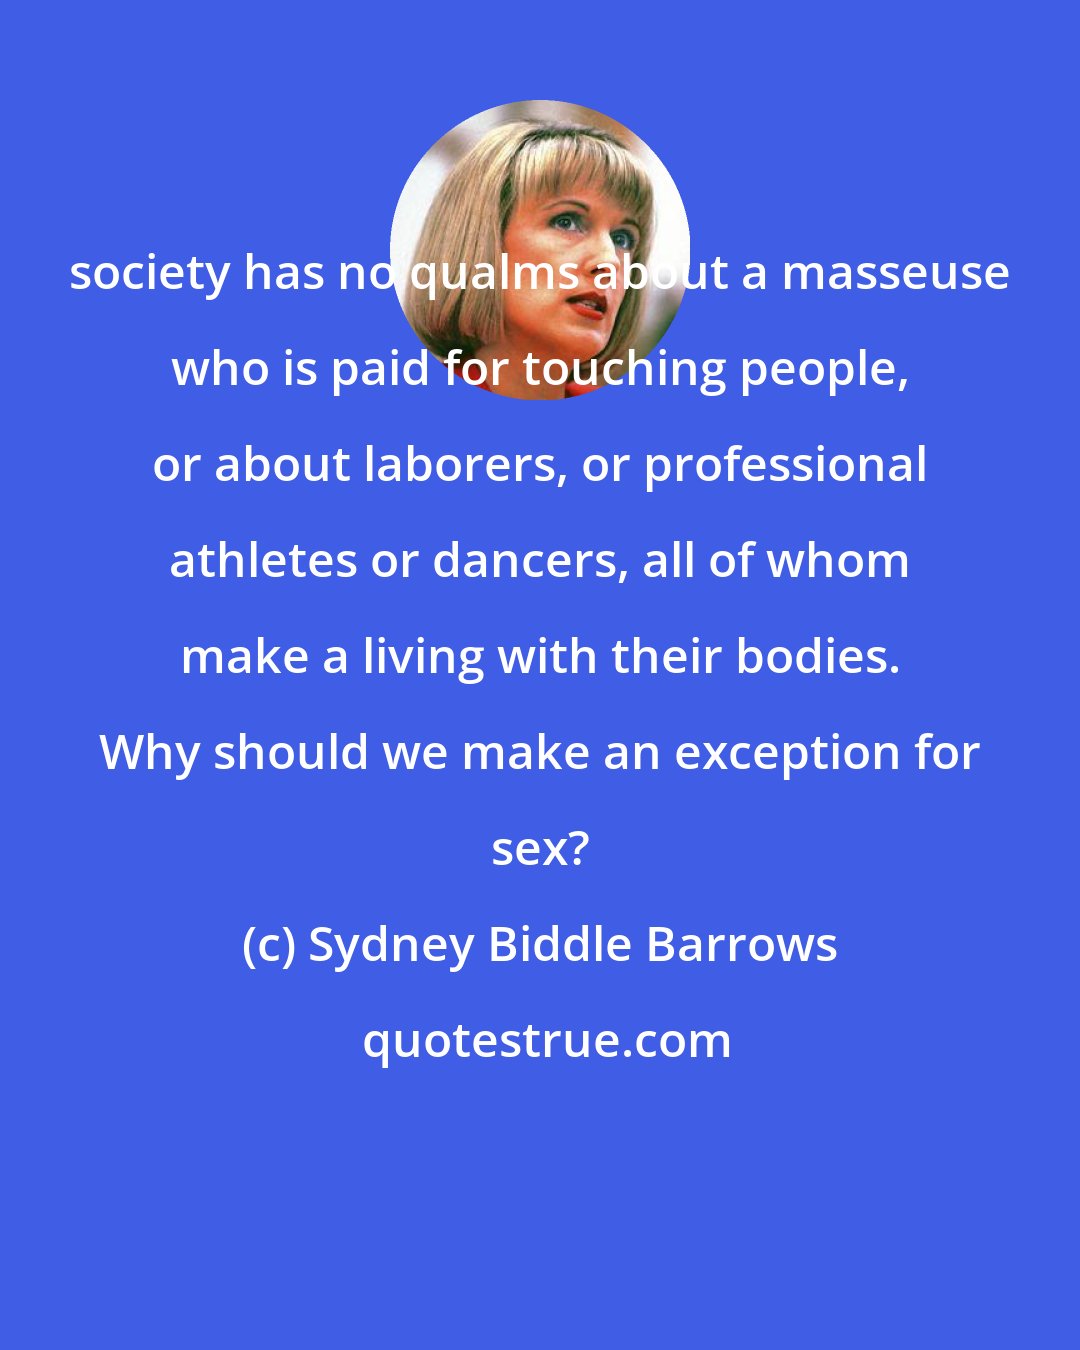 Sydney Biddle Barrows: society has no qualms about a masseuse who is paid for touching people, or about laborers, or professional athletes or dancers, all of whom make a living with their bodies. Why should we make an exception for sex?